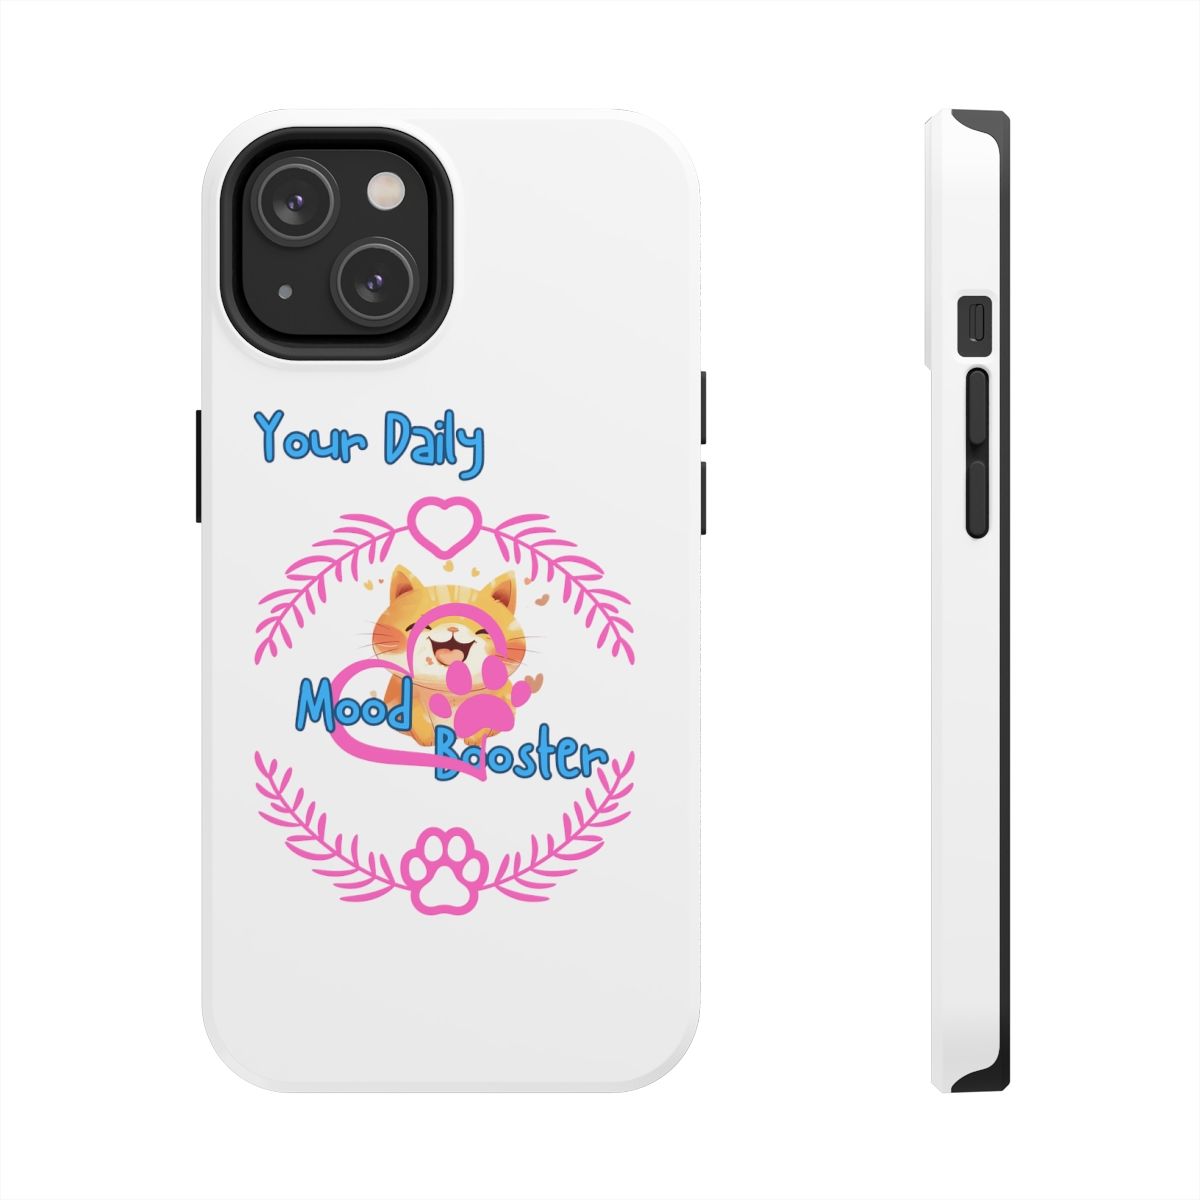 Mood Booster - Phone Cases